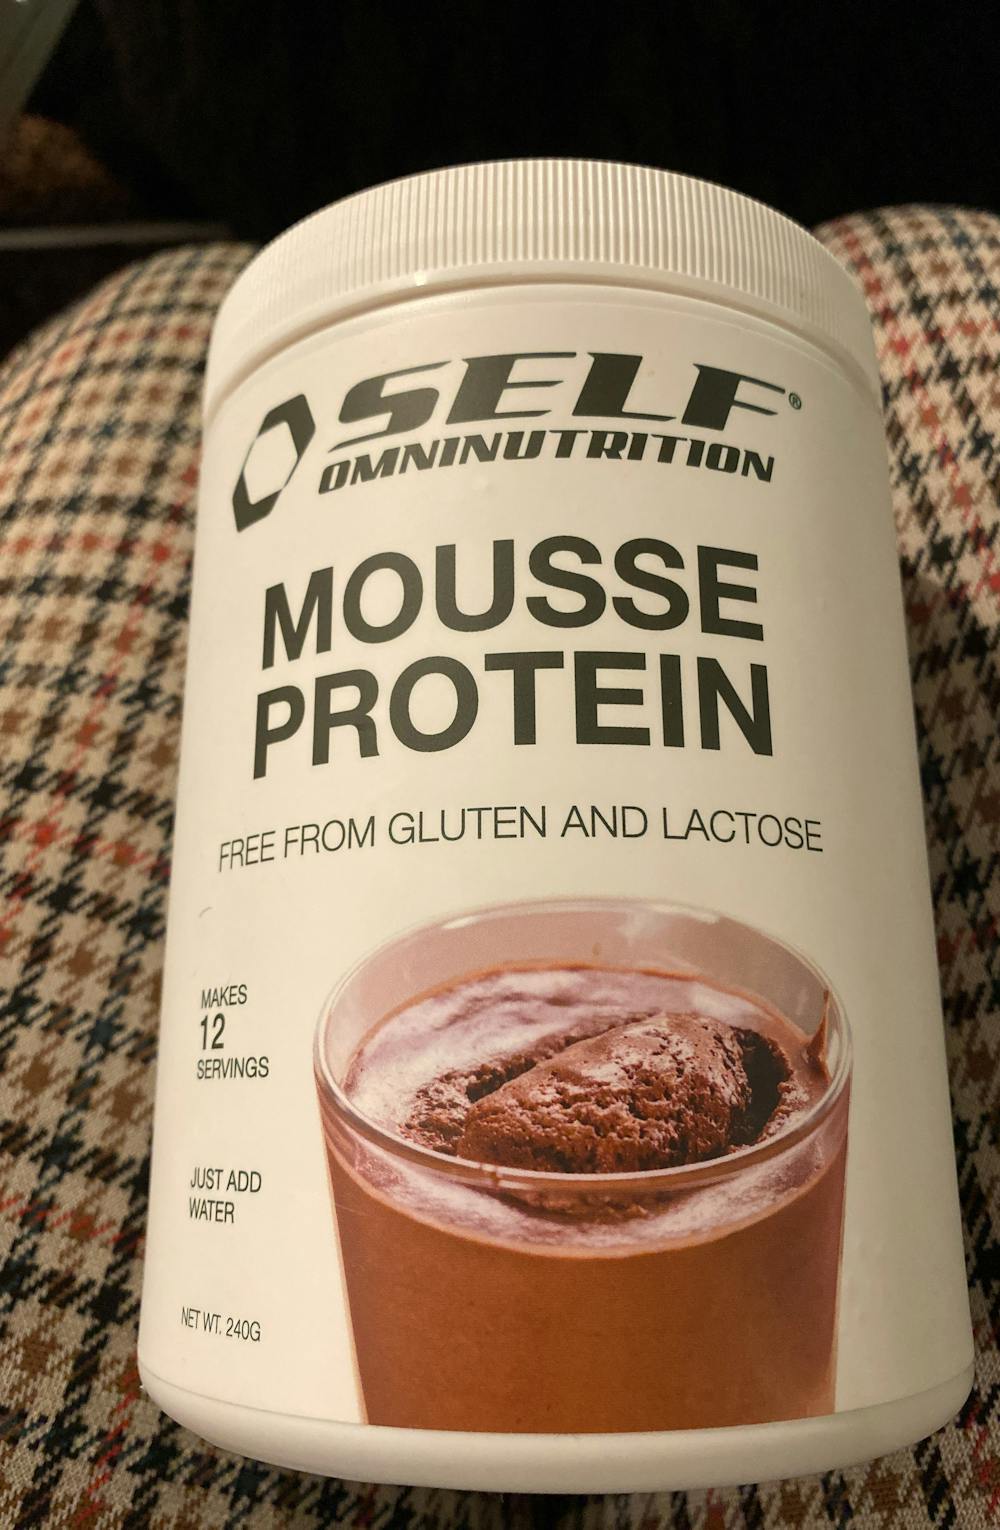 Mousse protein, Self omninutrition